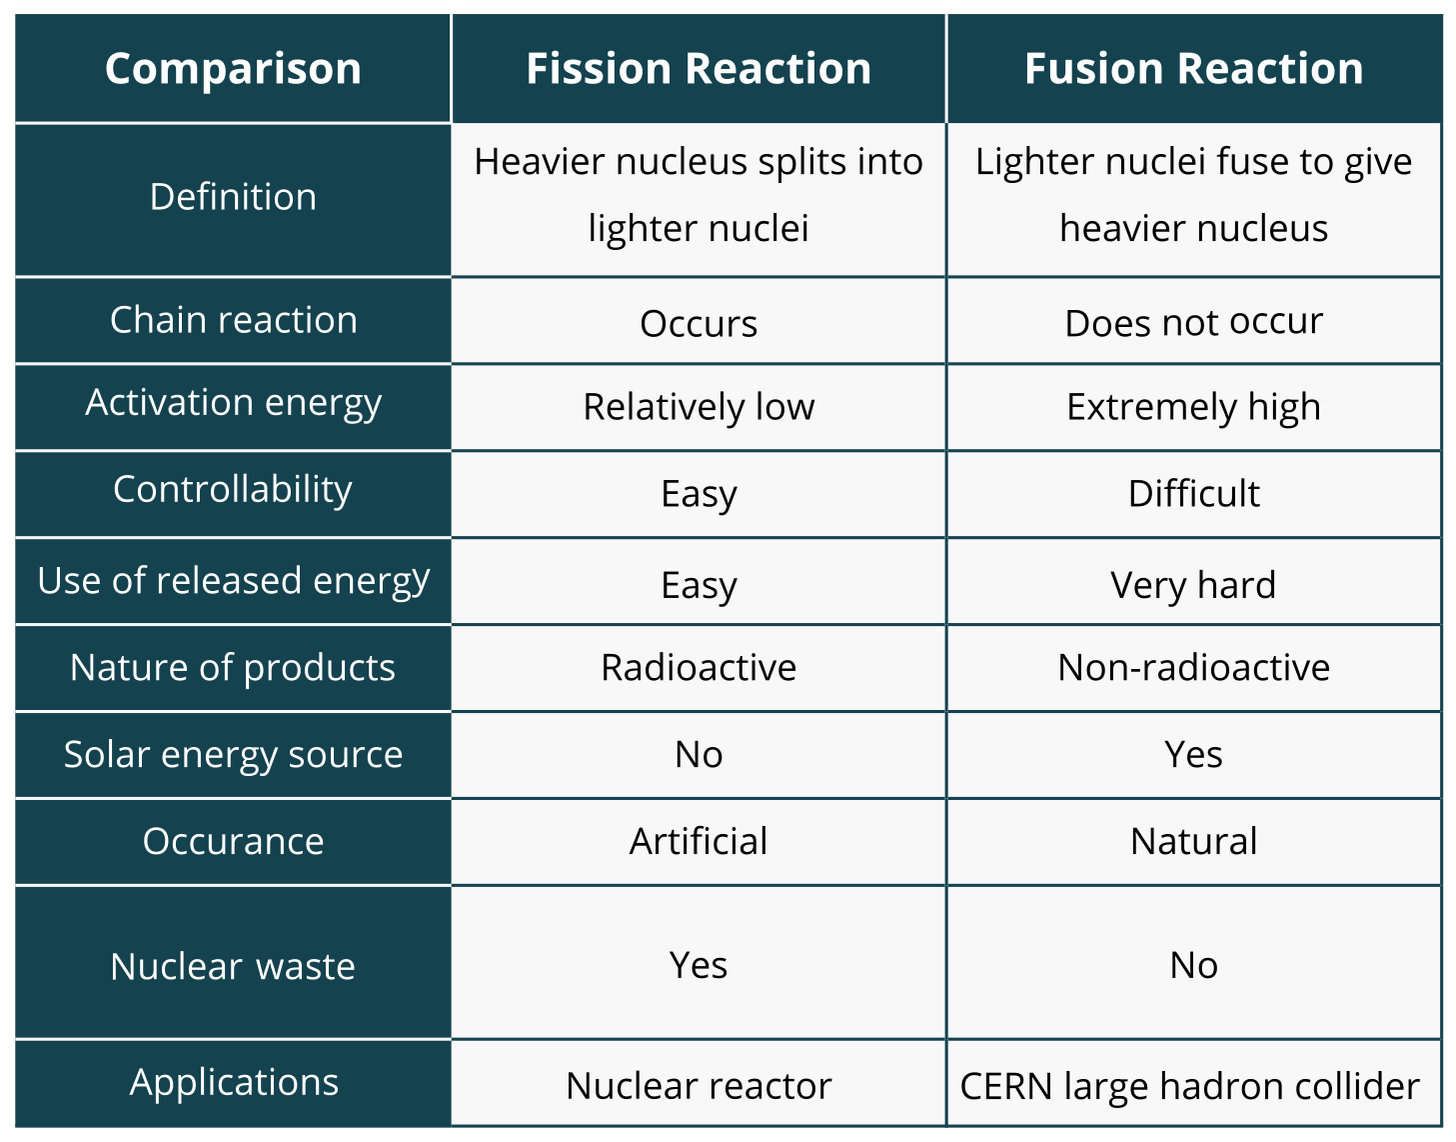 Fission vs. Fusion: The Nuclear Reactions - PSIBERG